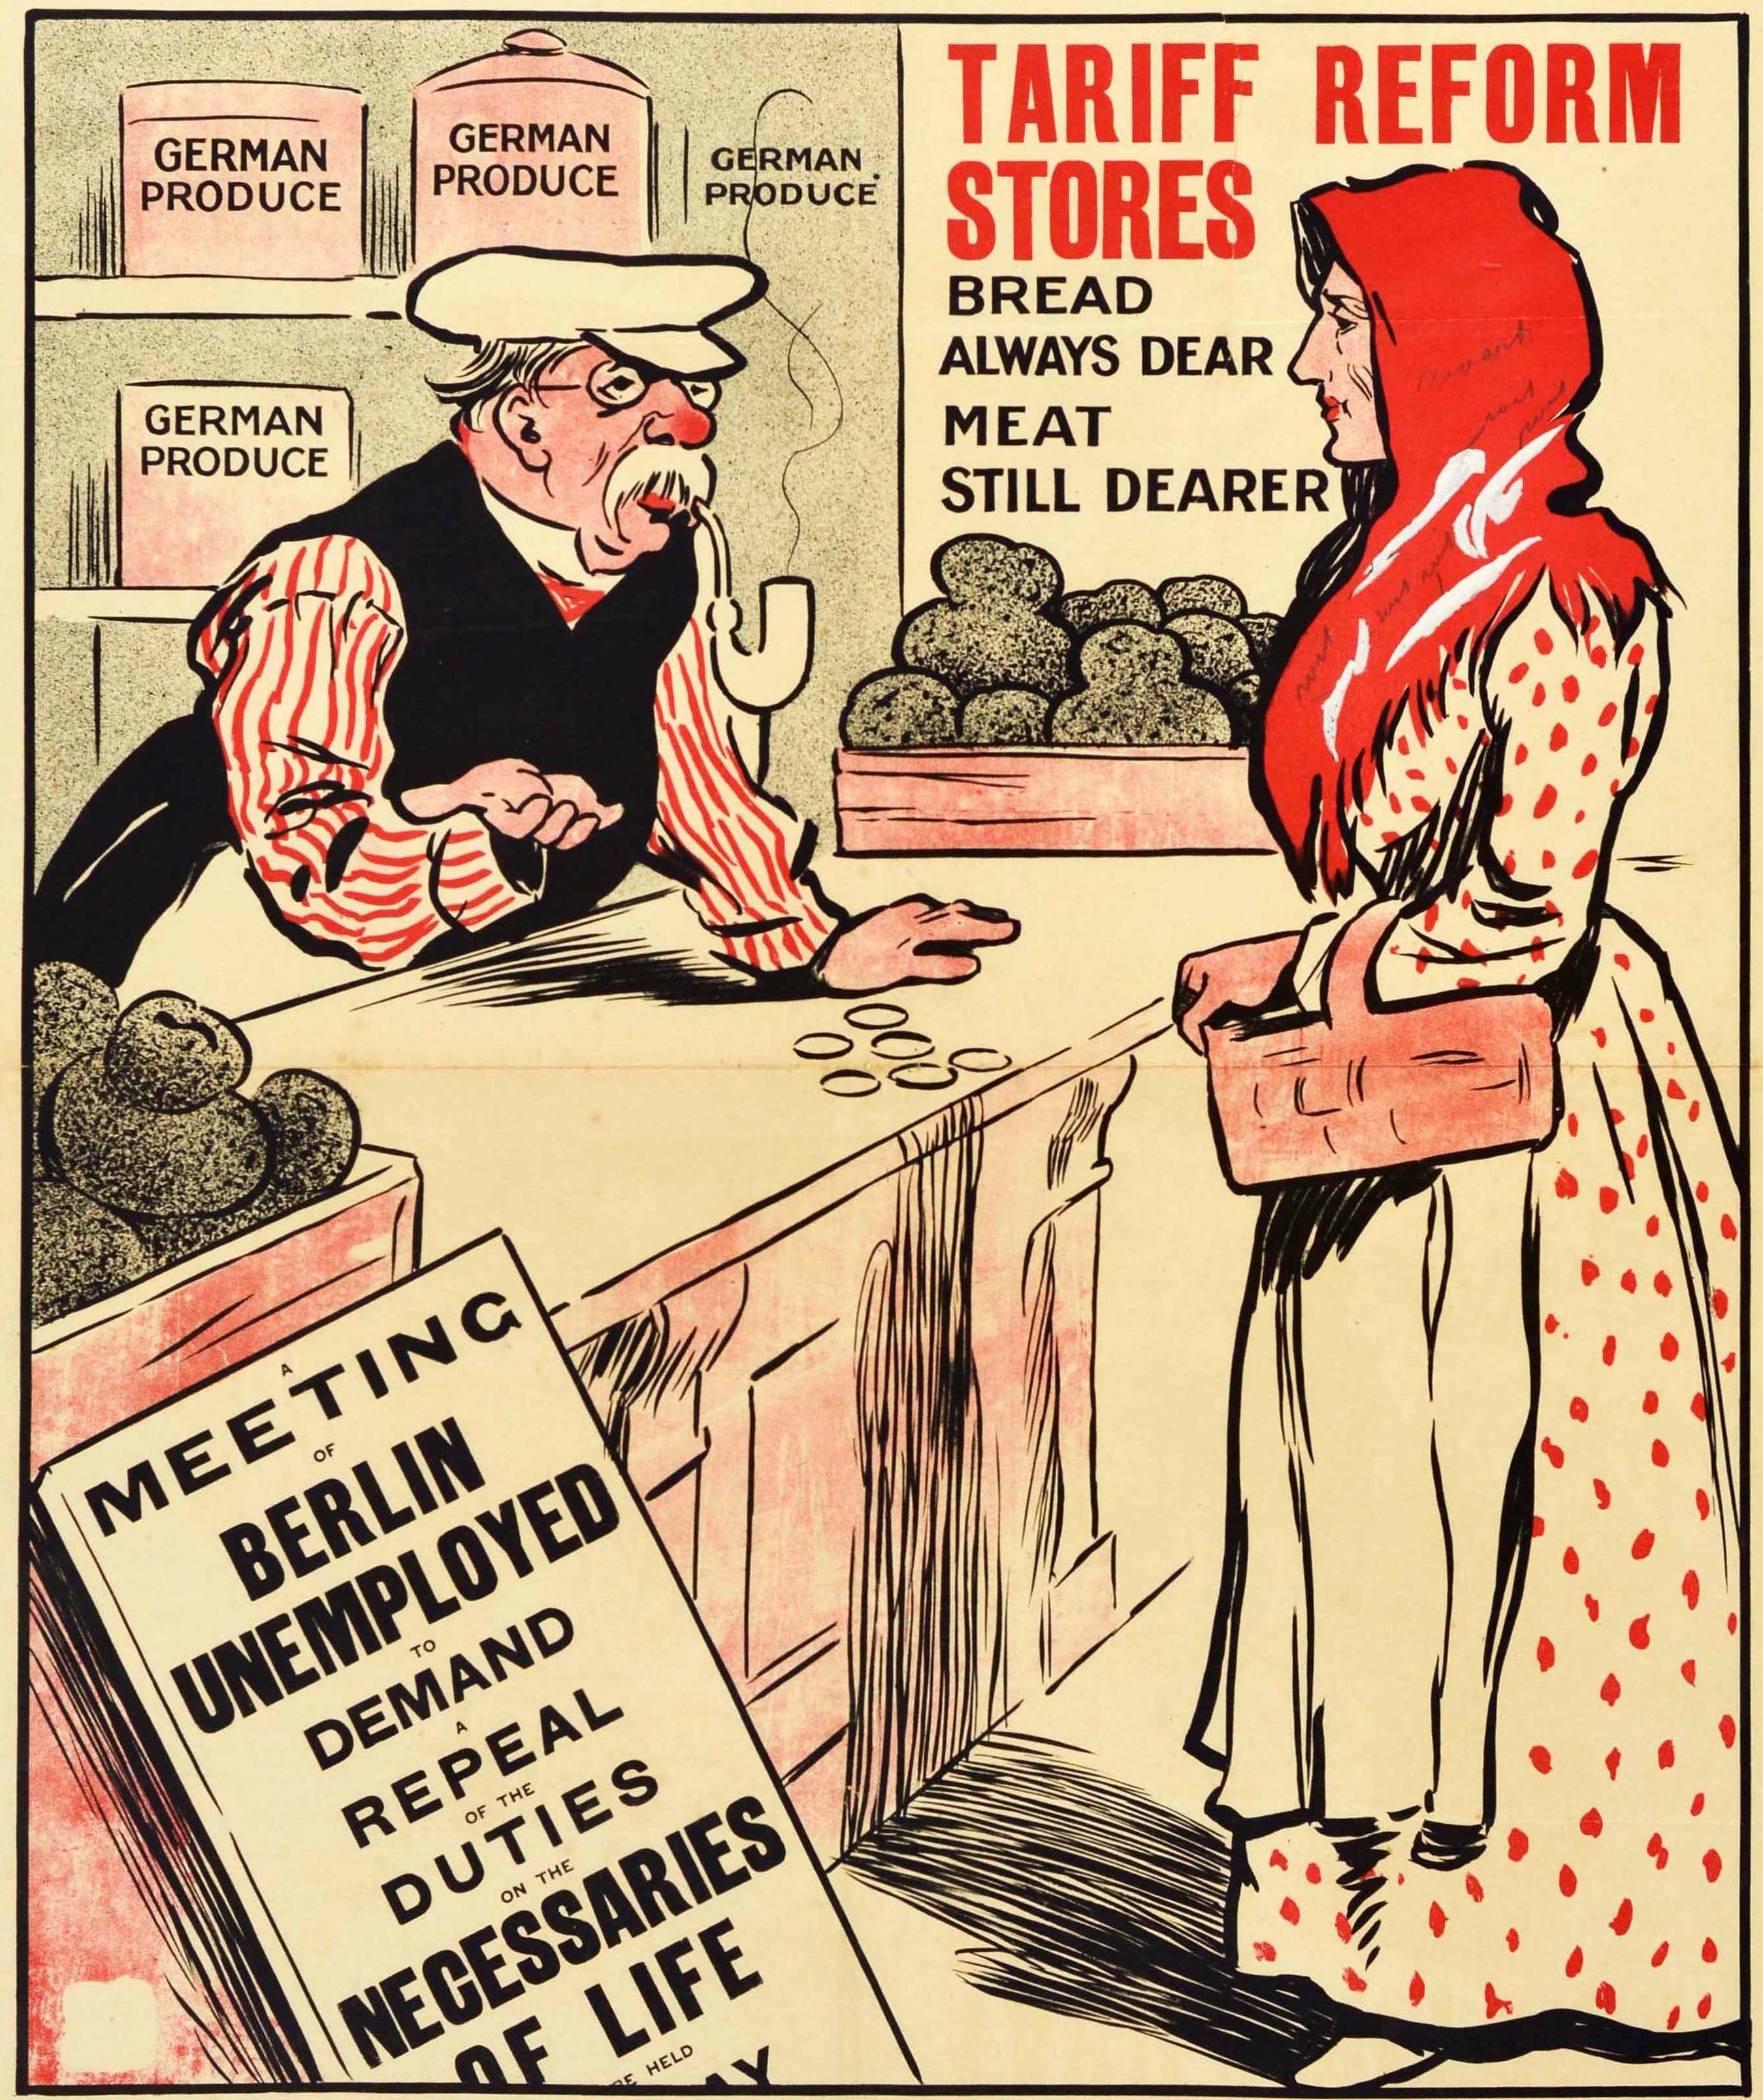 Original antique political election propaganda poster issued by the Liberal Party in support of Tariff Reform - An Eye Opener - featuring an illustration of a German shopkeeper wearing glasses, a white hat and black waistcoat over a striped shirt